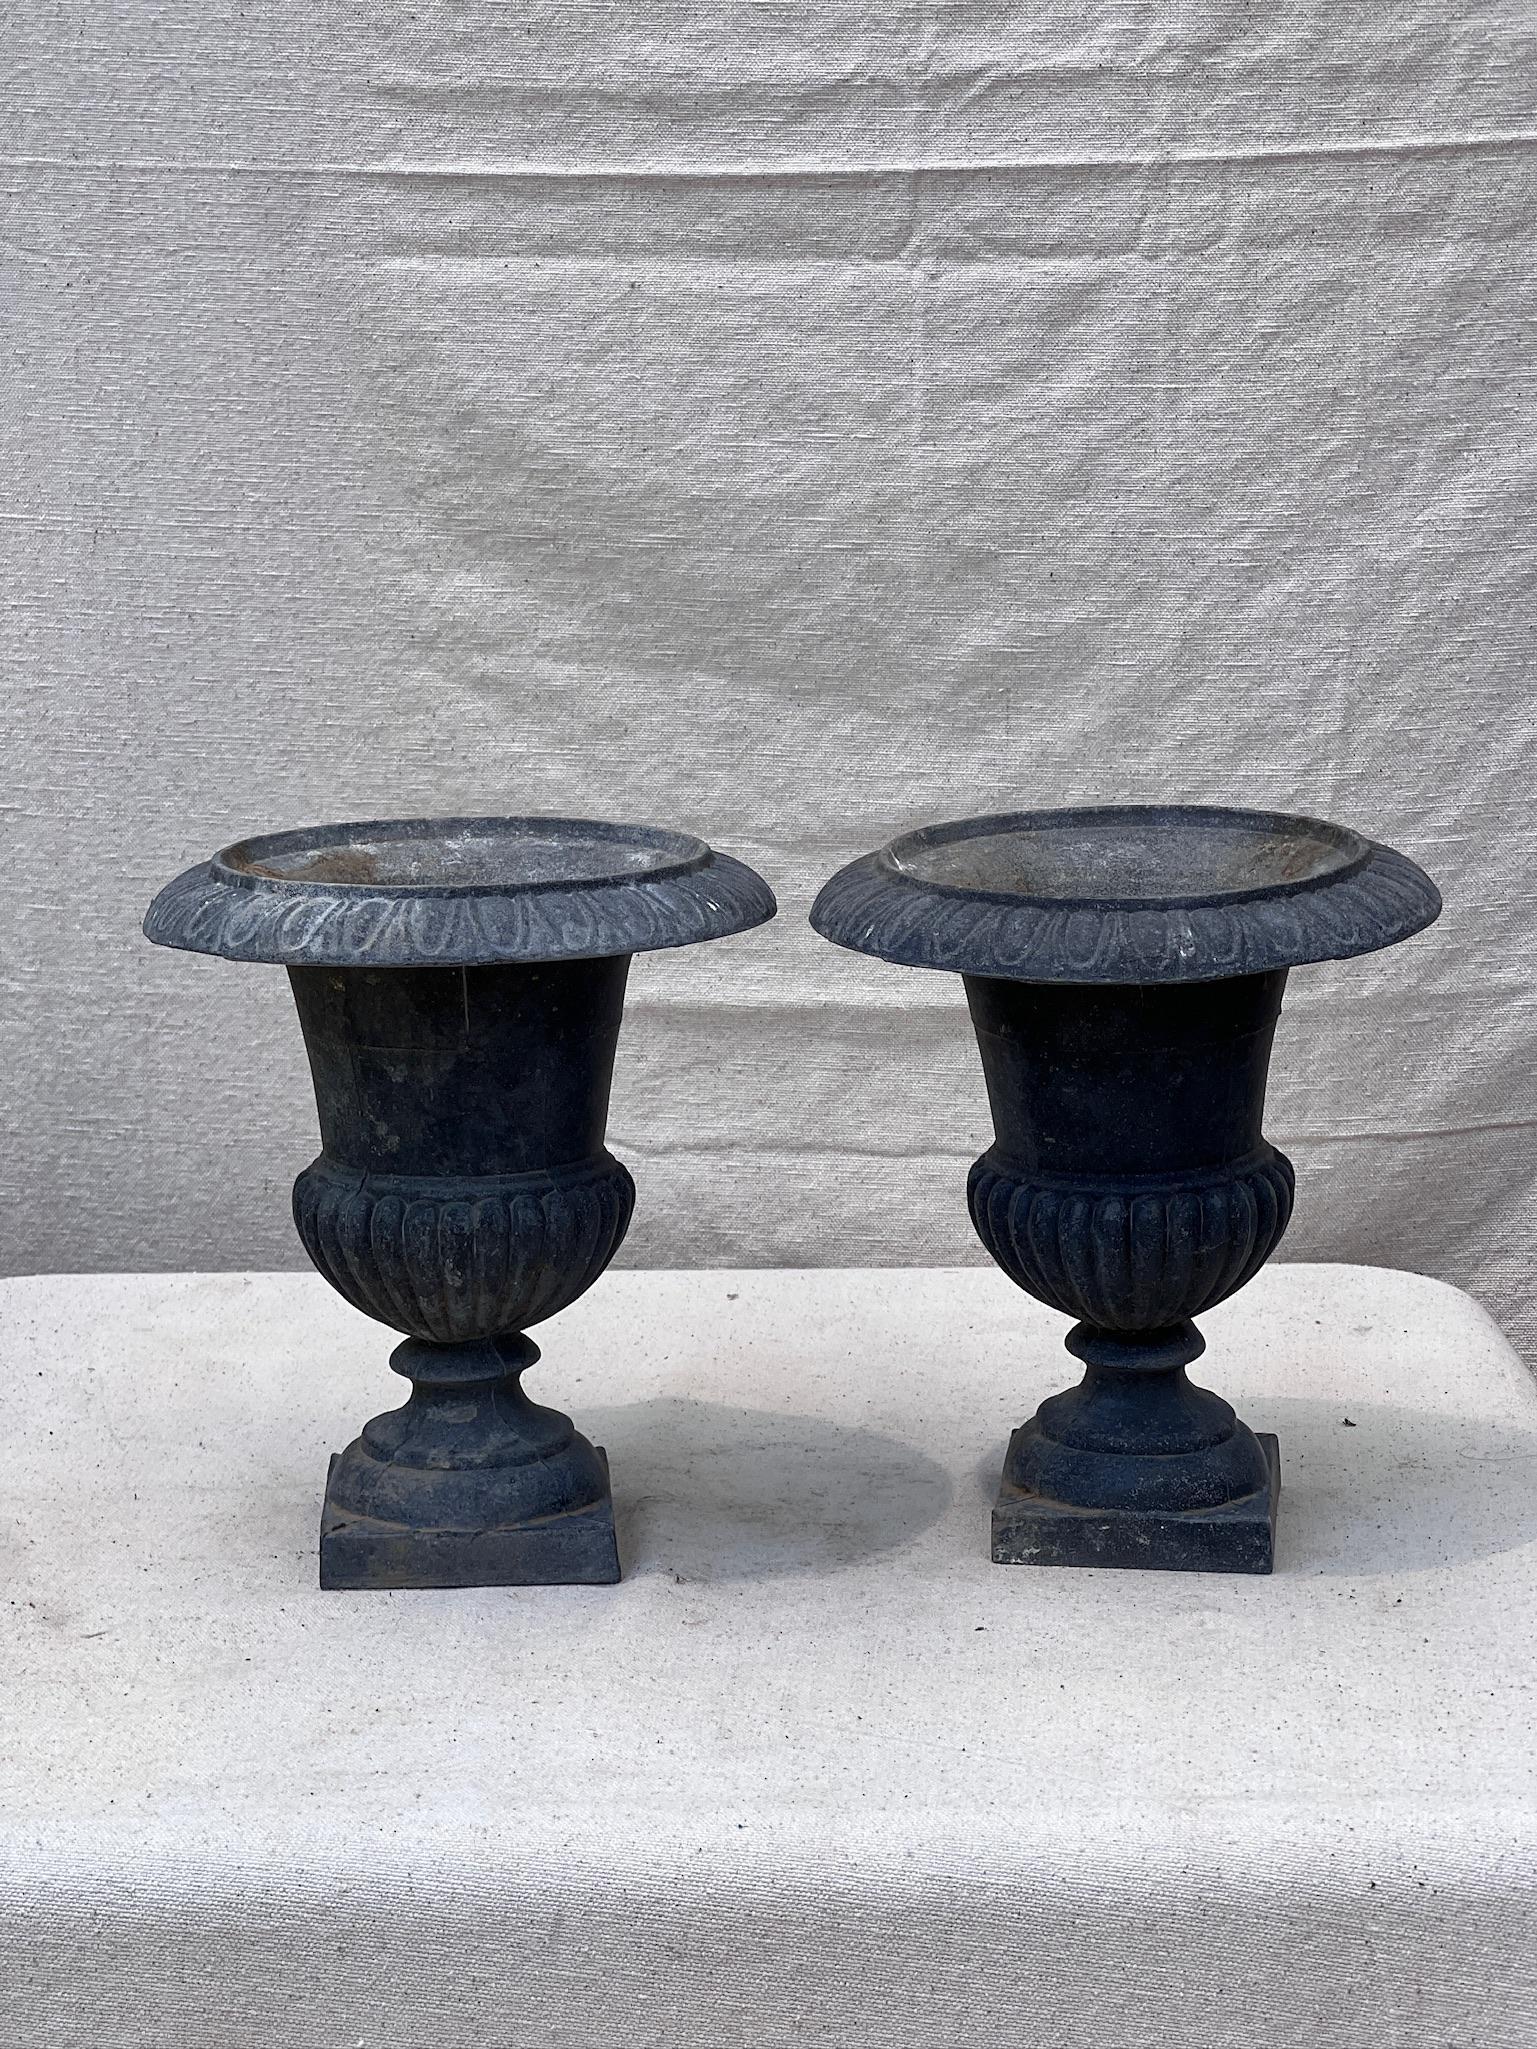 The pair of elegant antique Neoclassical Cast Iron Urn Planter or Jardiniere from the early 20th-century hail from France and were designed in the sophisticated neoclassical style. The exquisitely crafted cast iron urn or planters exude charm and